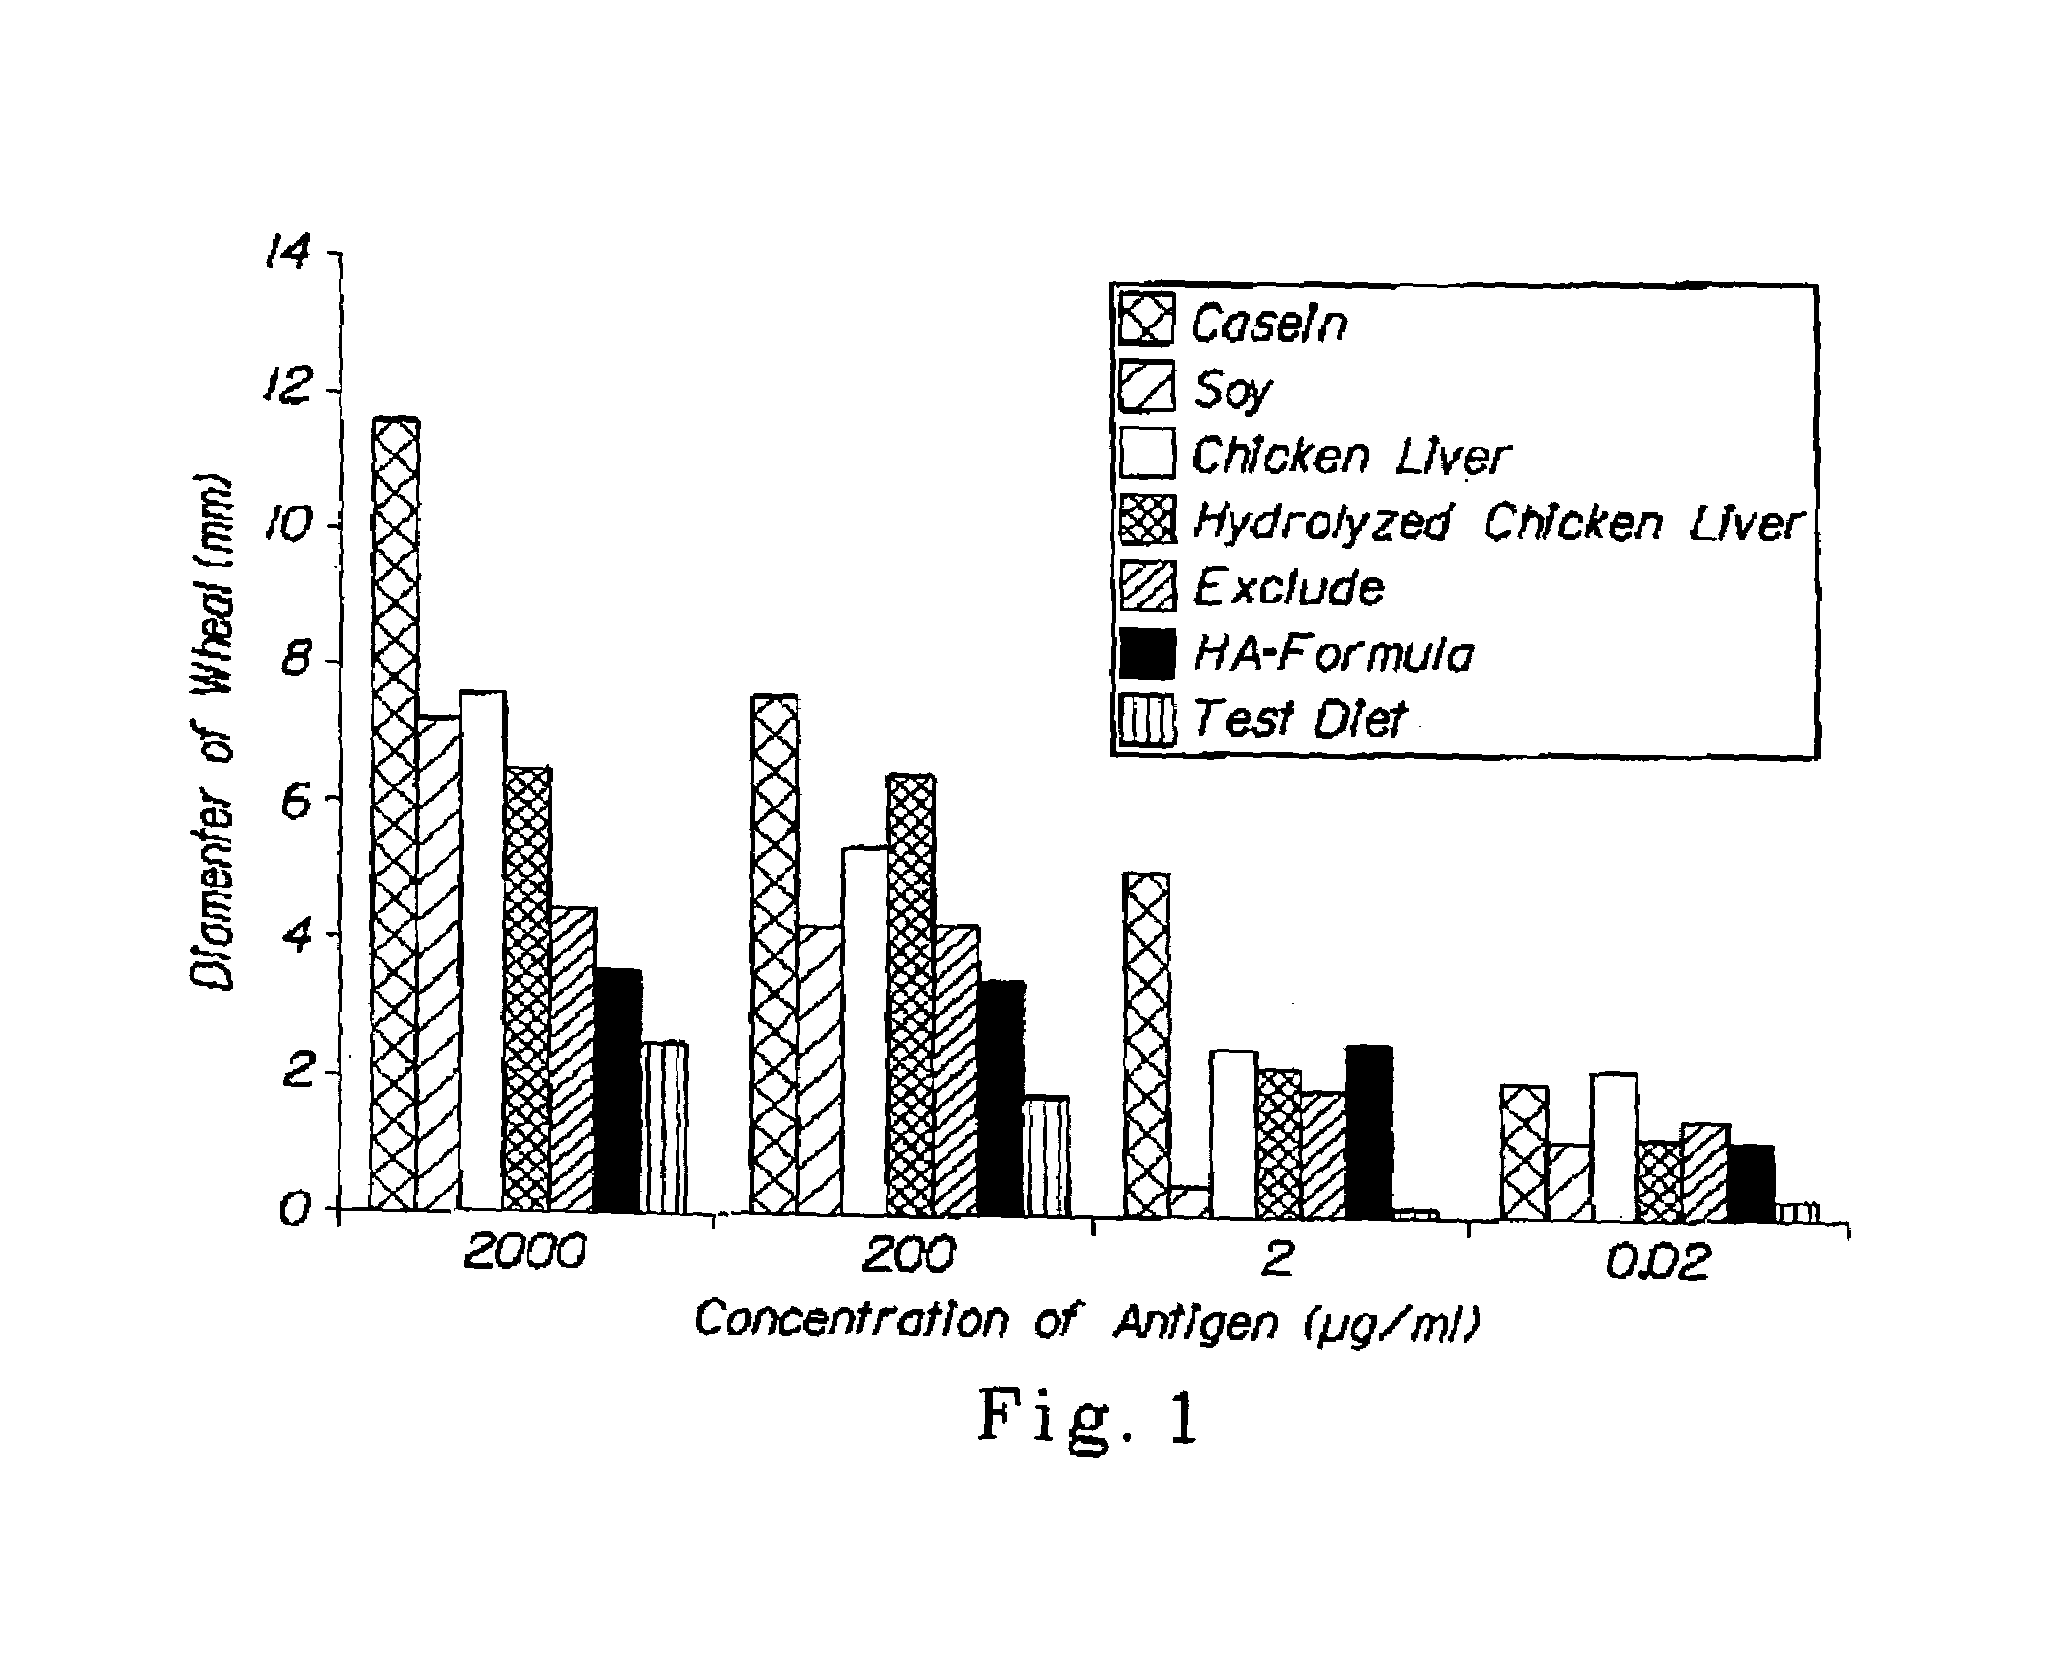 Hypoallergenic dietary companion animal composition containing hydrolyzed poultry protein